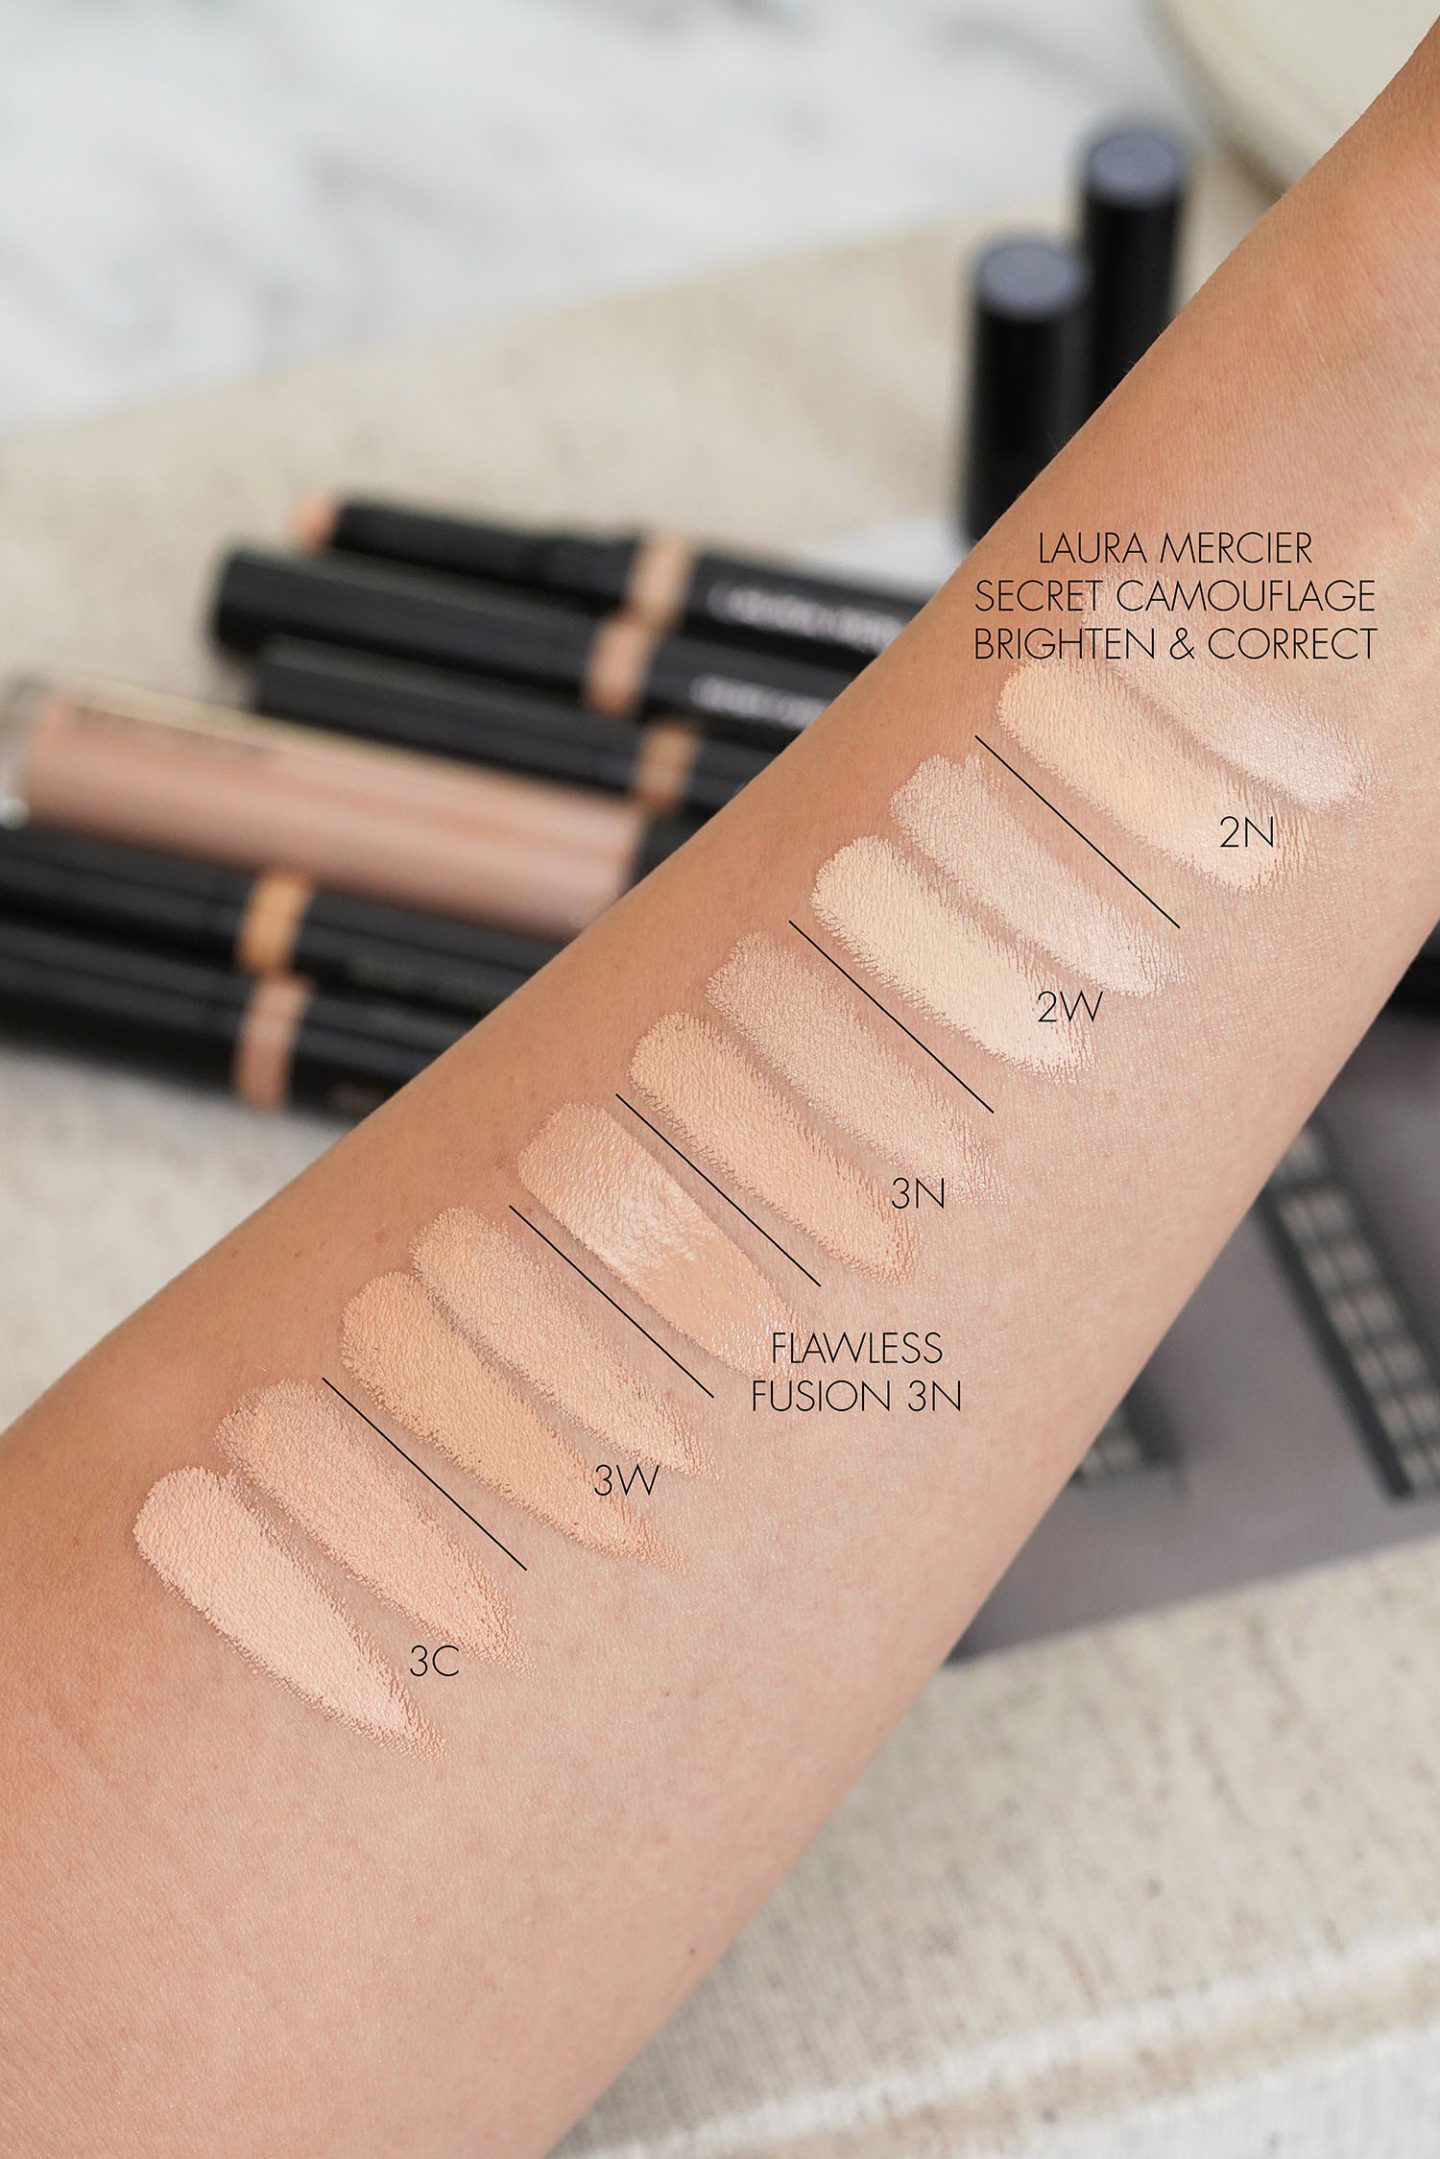 Laura Mercier Secret Camouflage Correct and Brighten Concealer Duo swatches 2 and 3 family